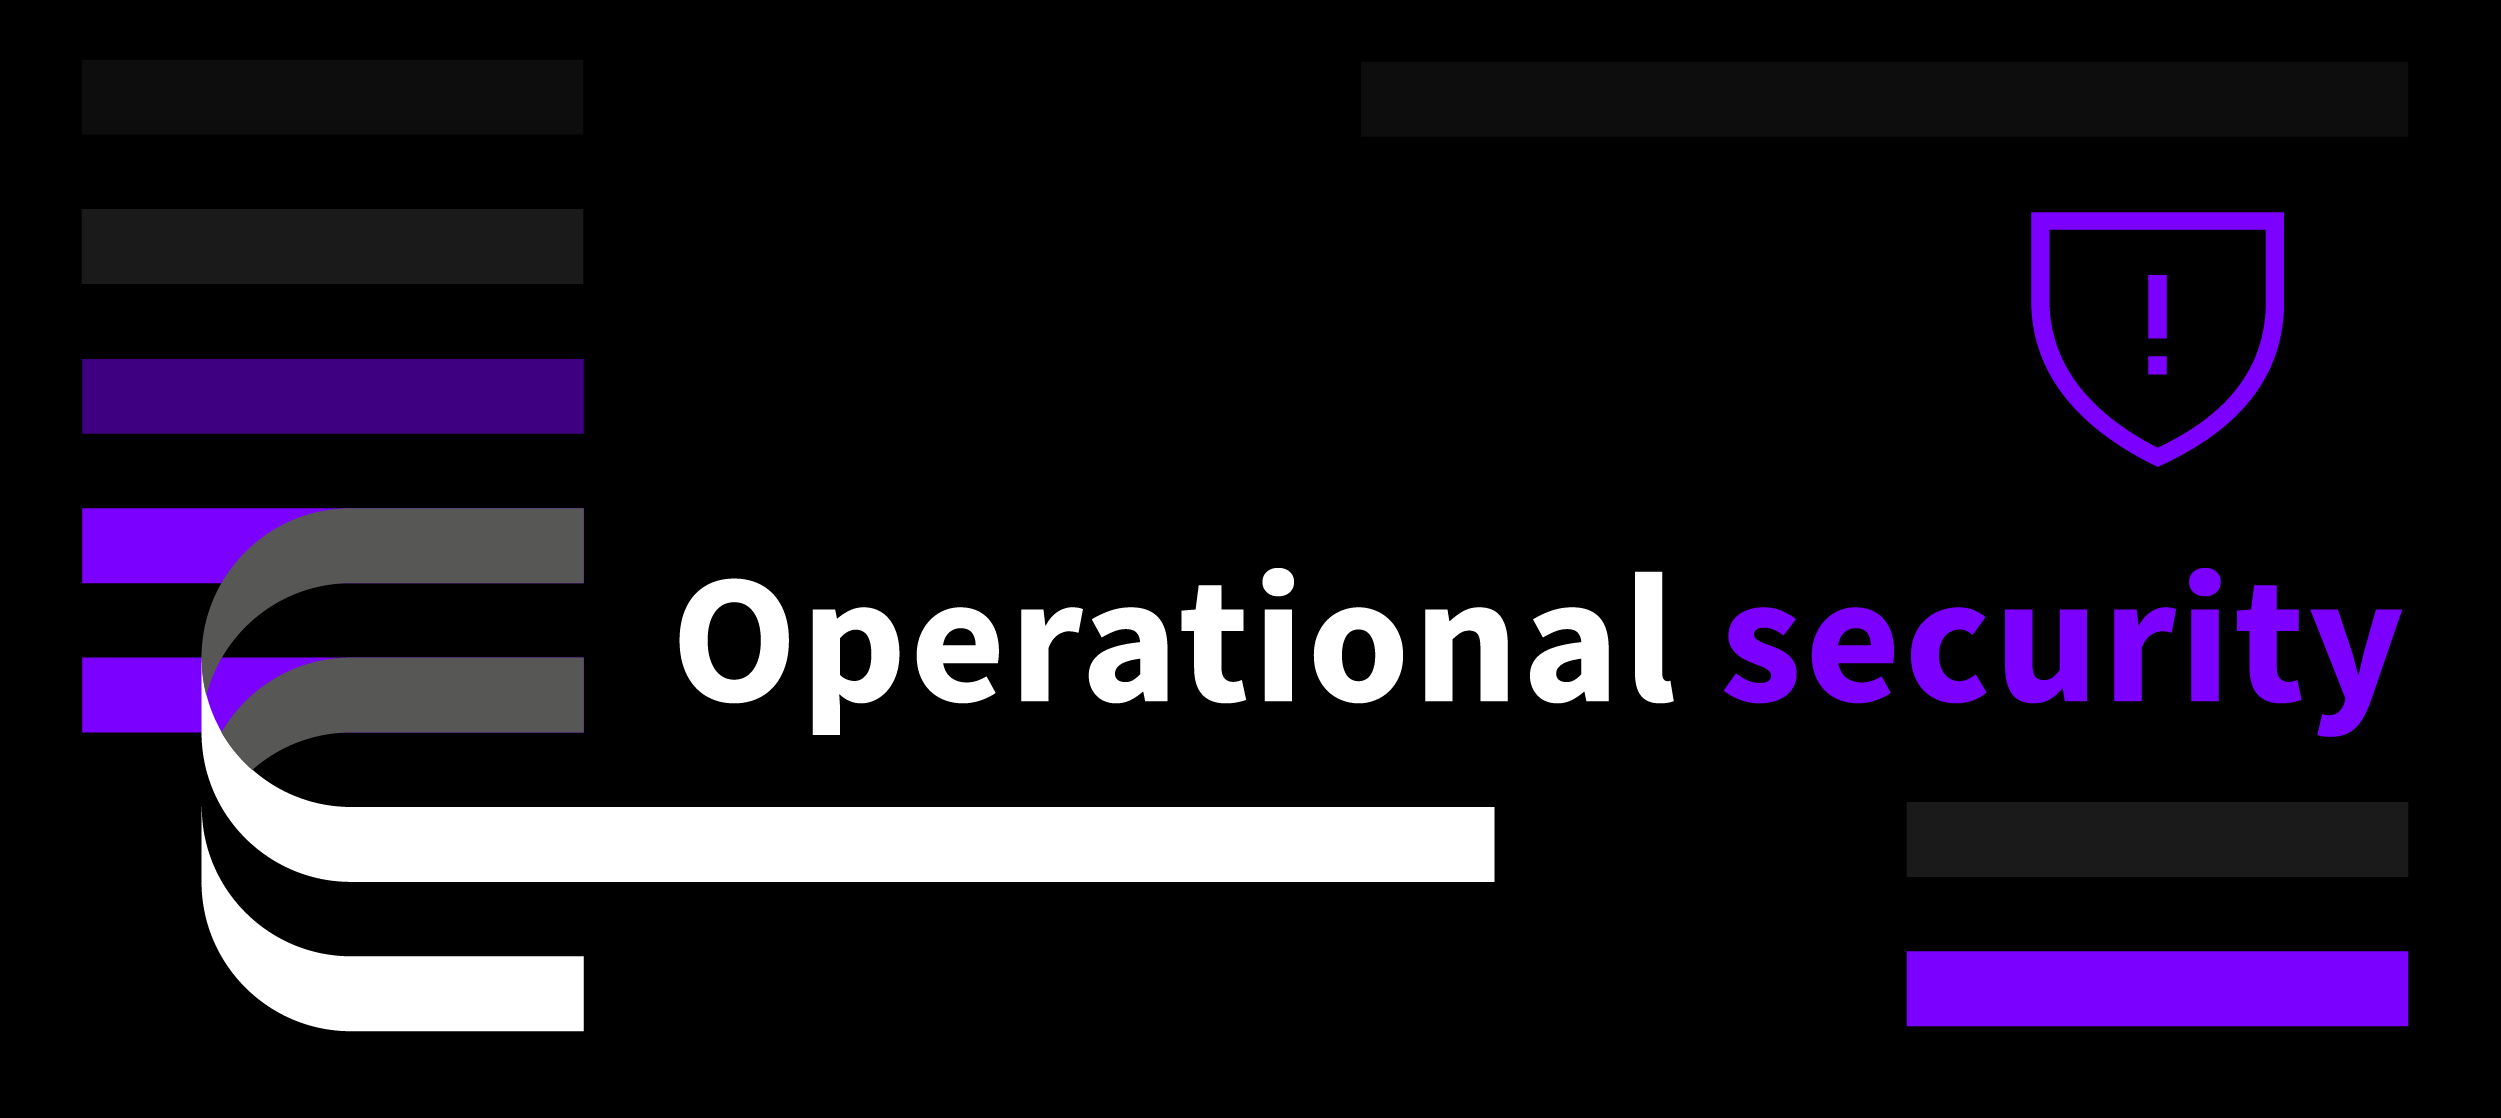 Operational security